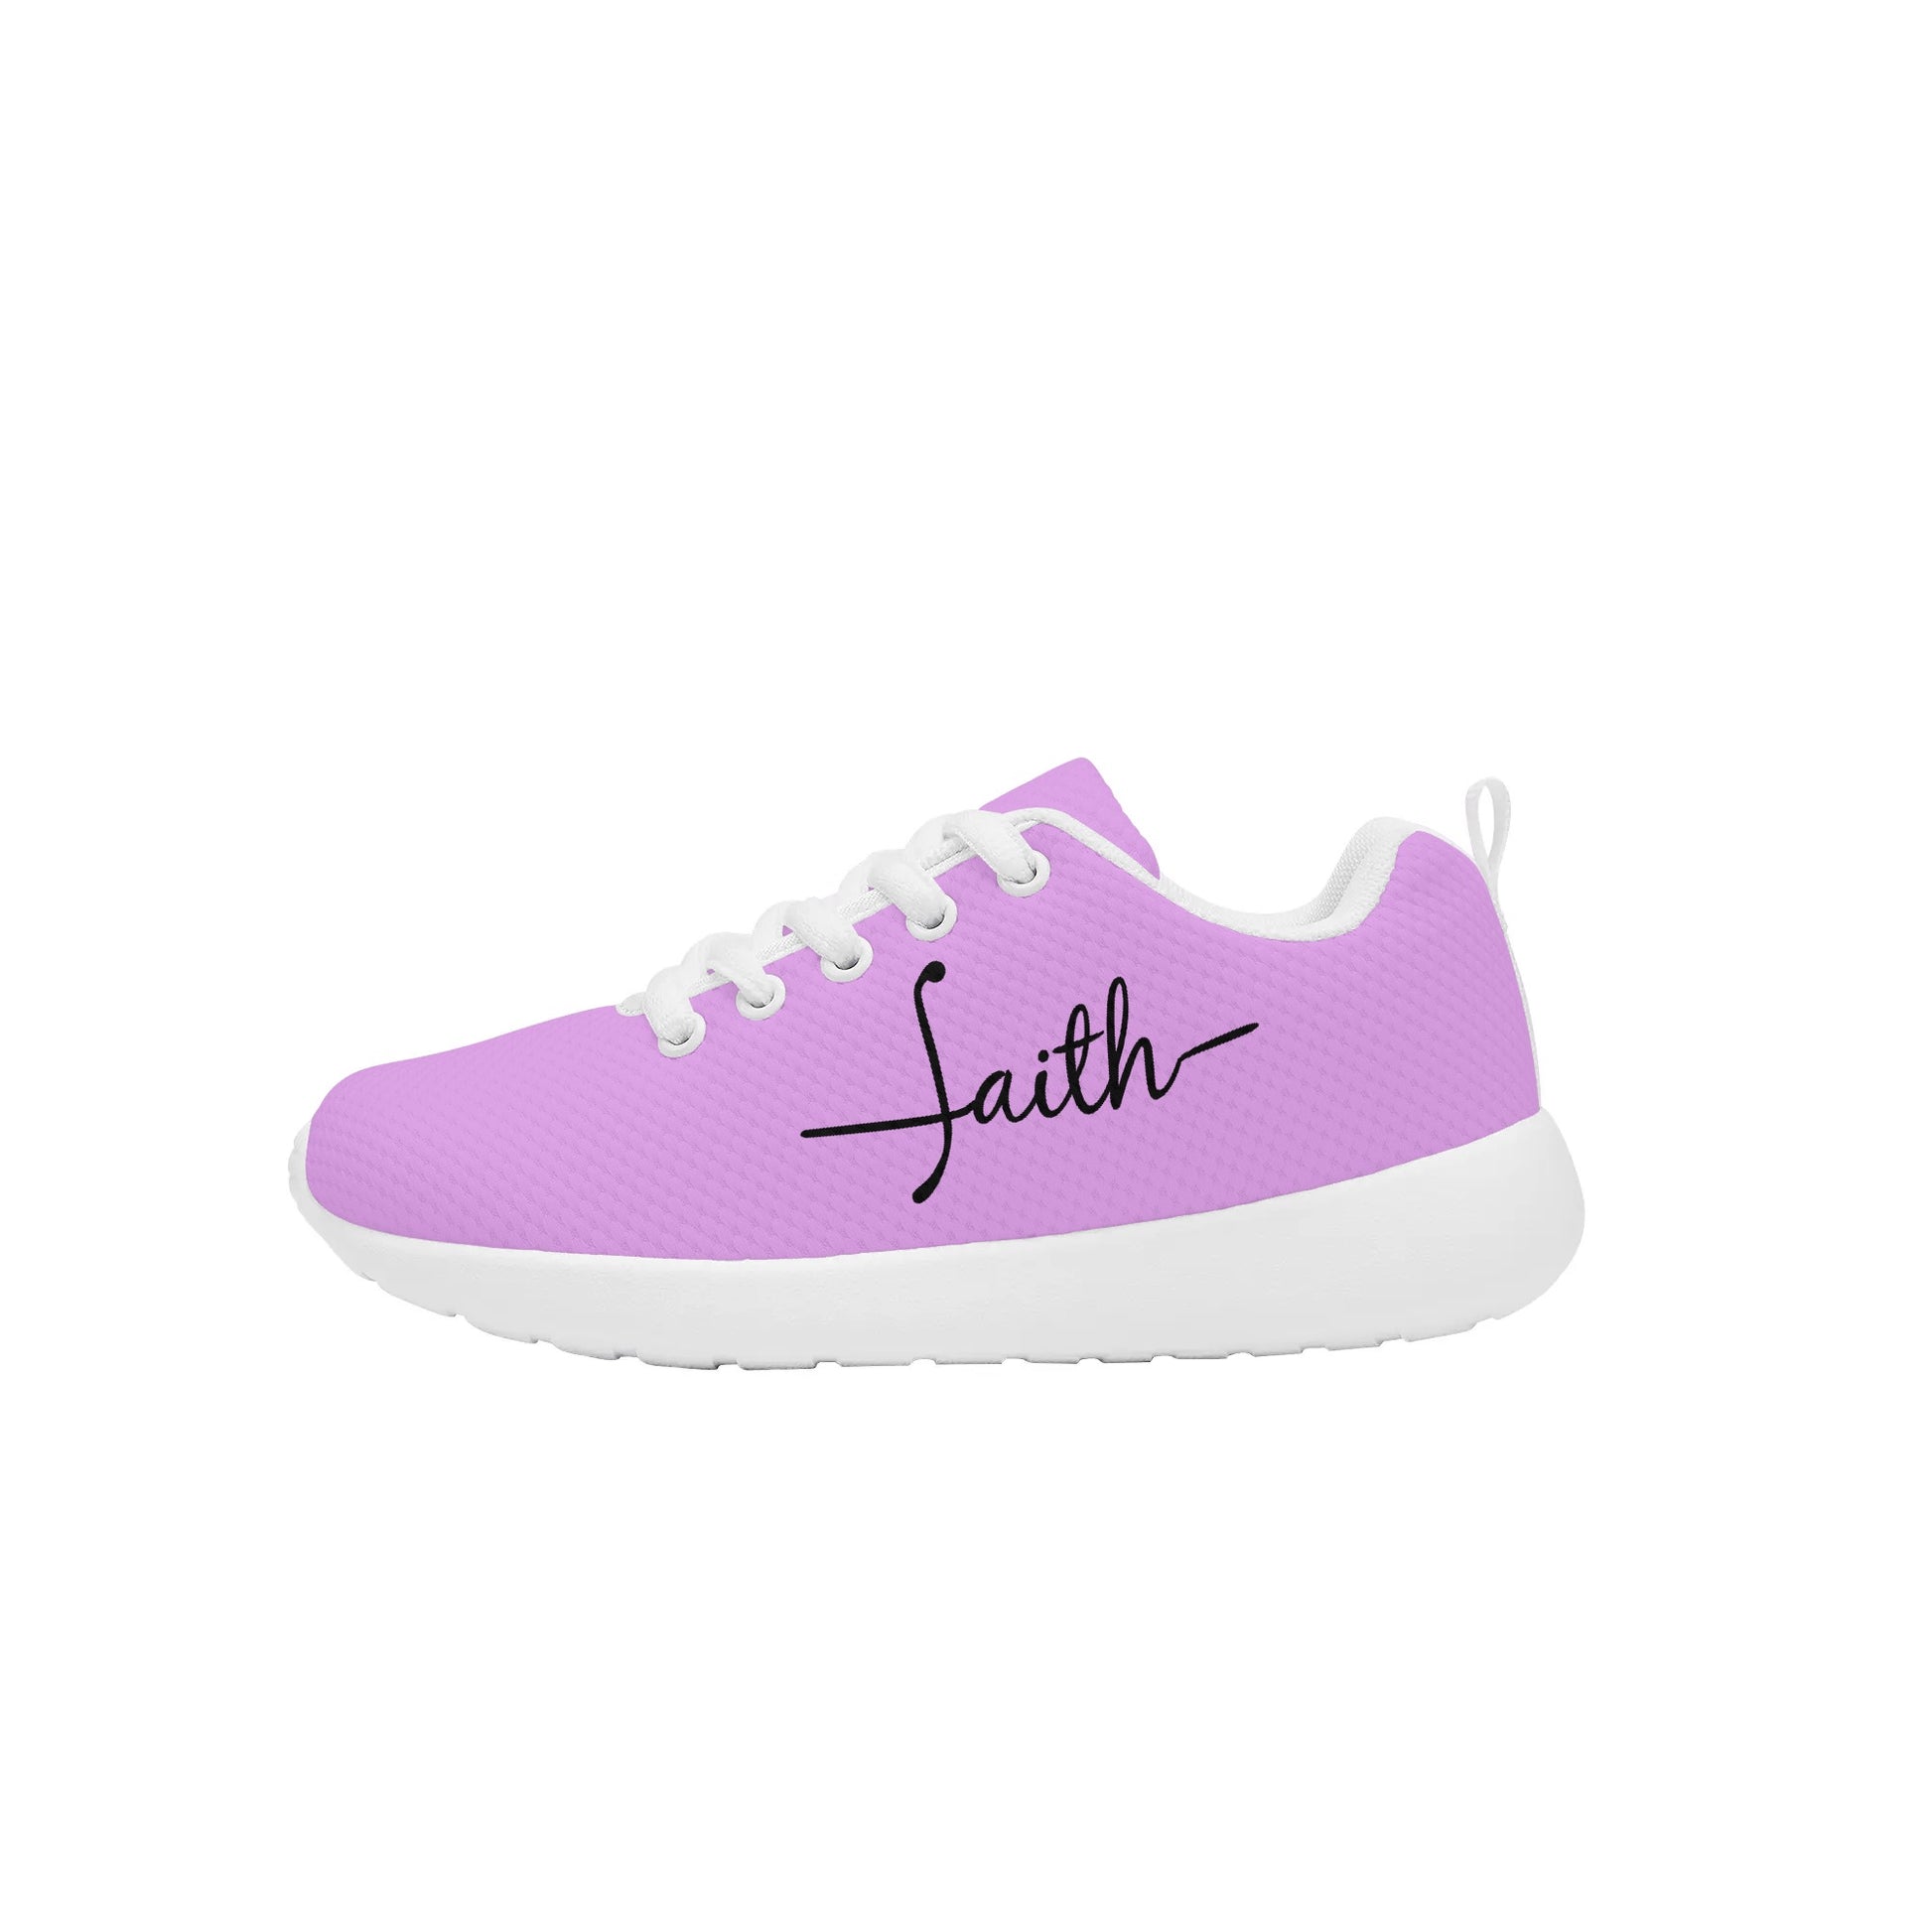 Faith Kids Lace-up Athletic Christian Sneakers popcustoms